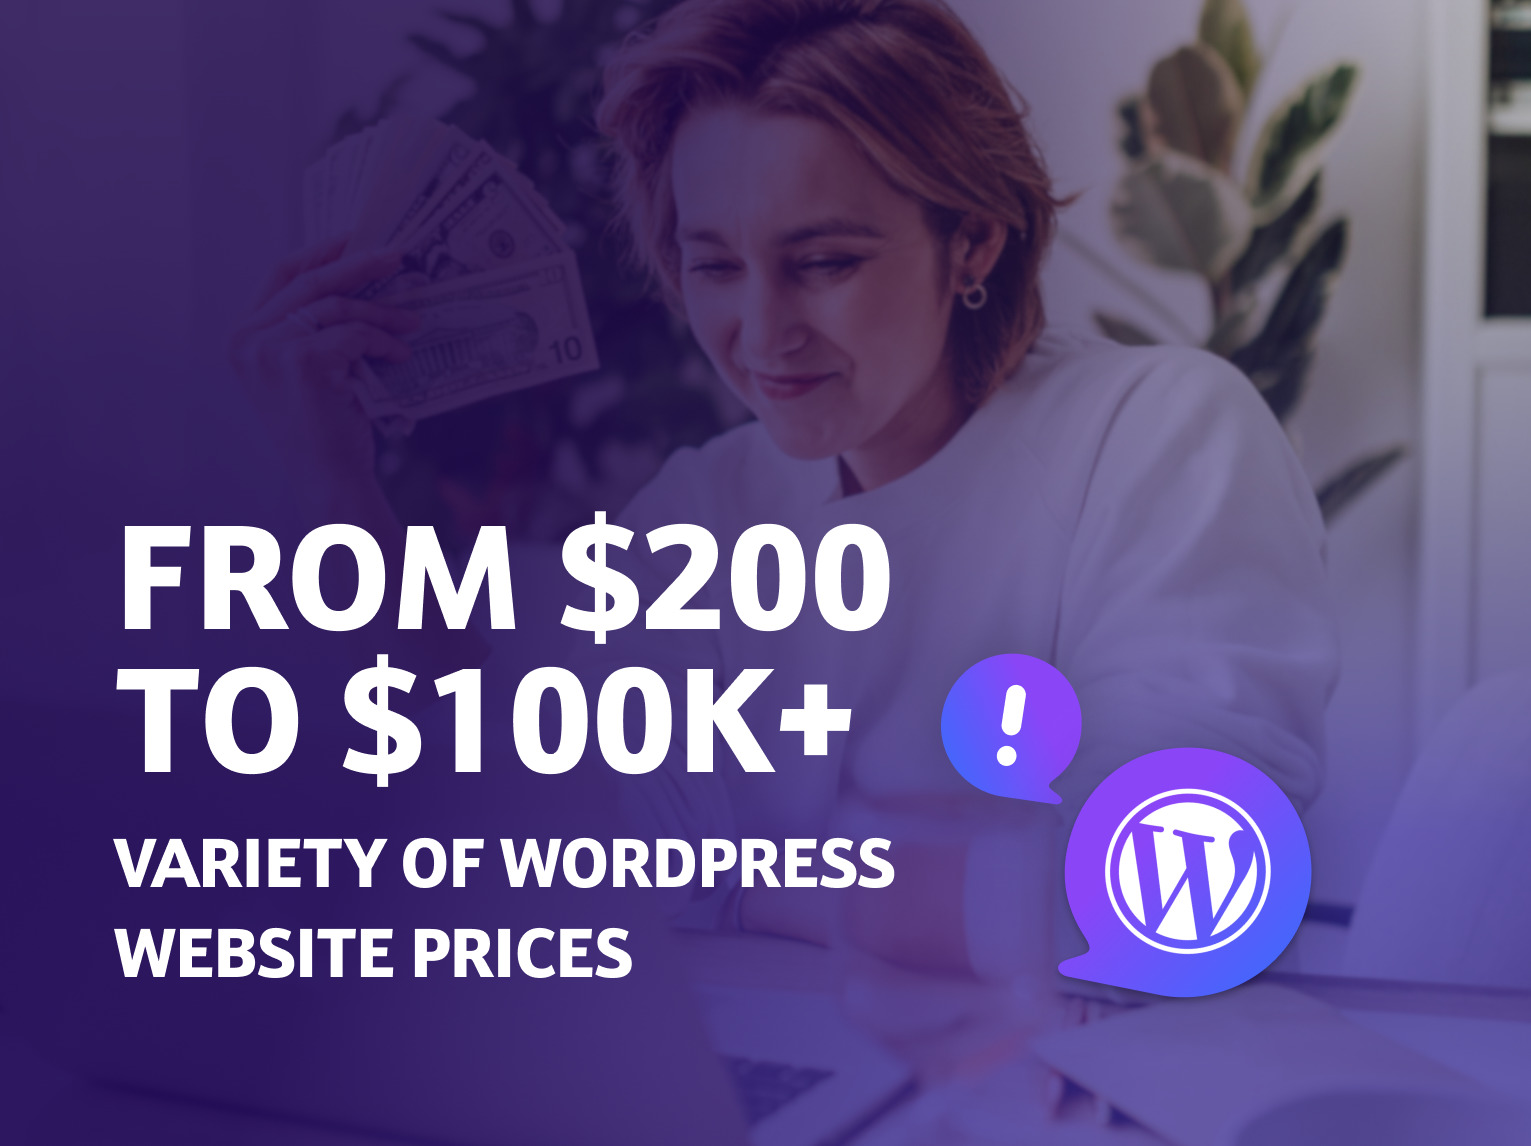 woman sitting at a computer with money wondering about WordPress prices